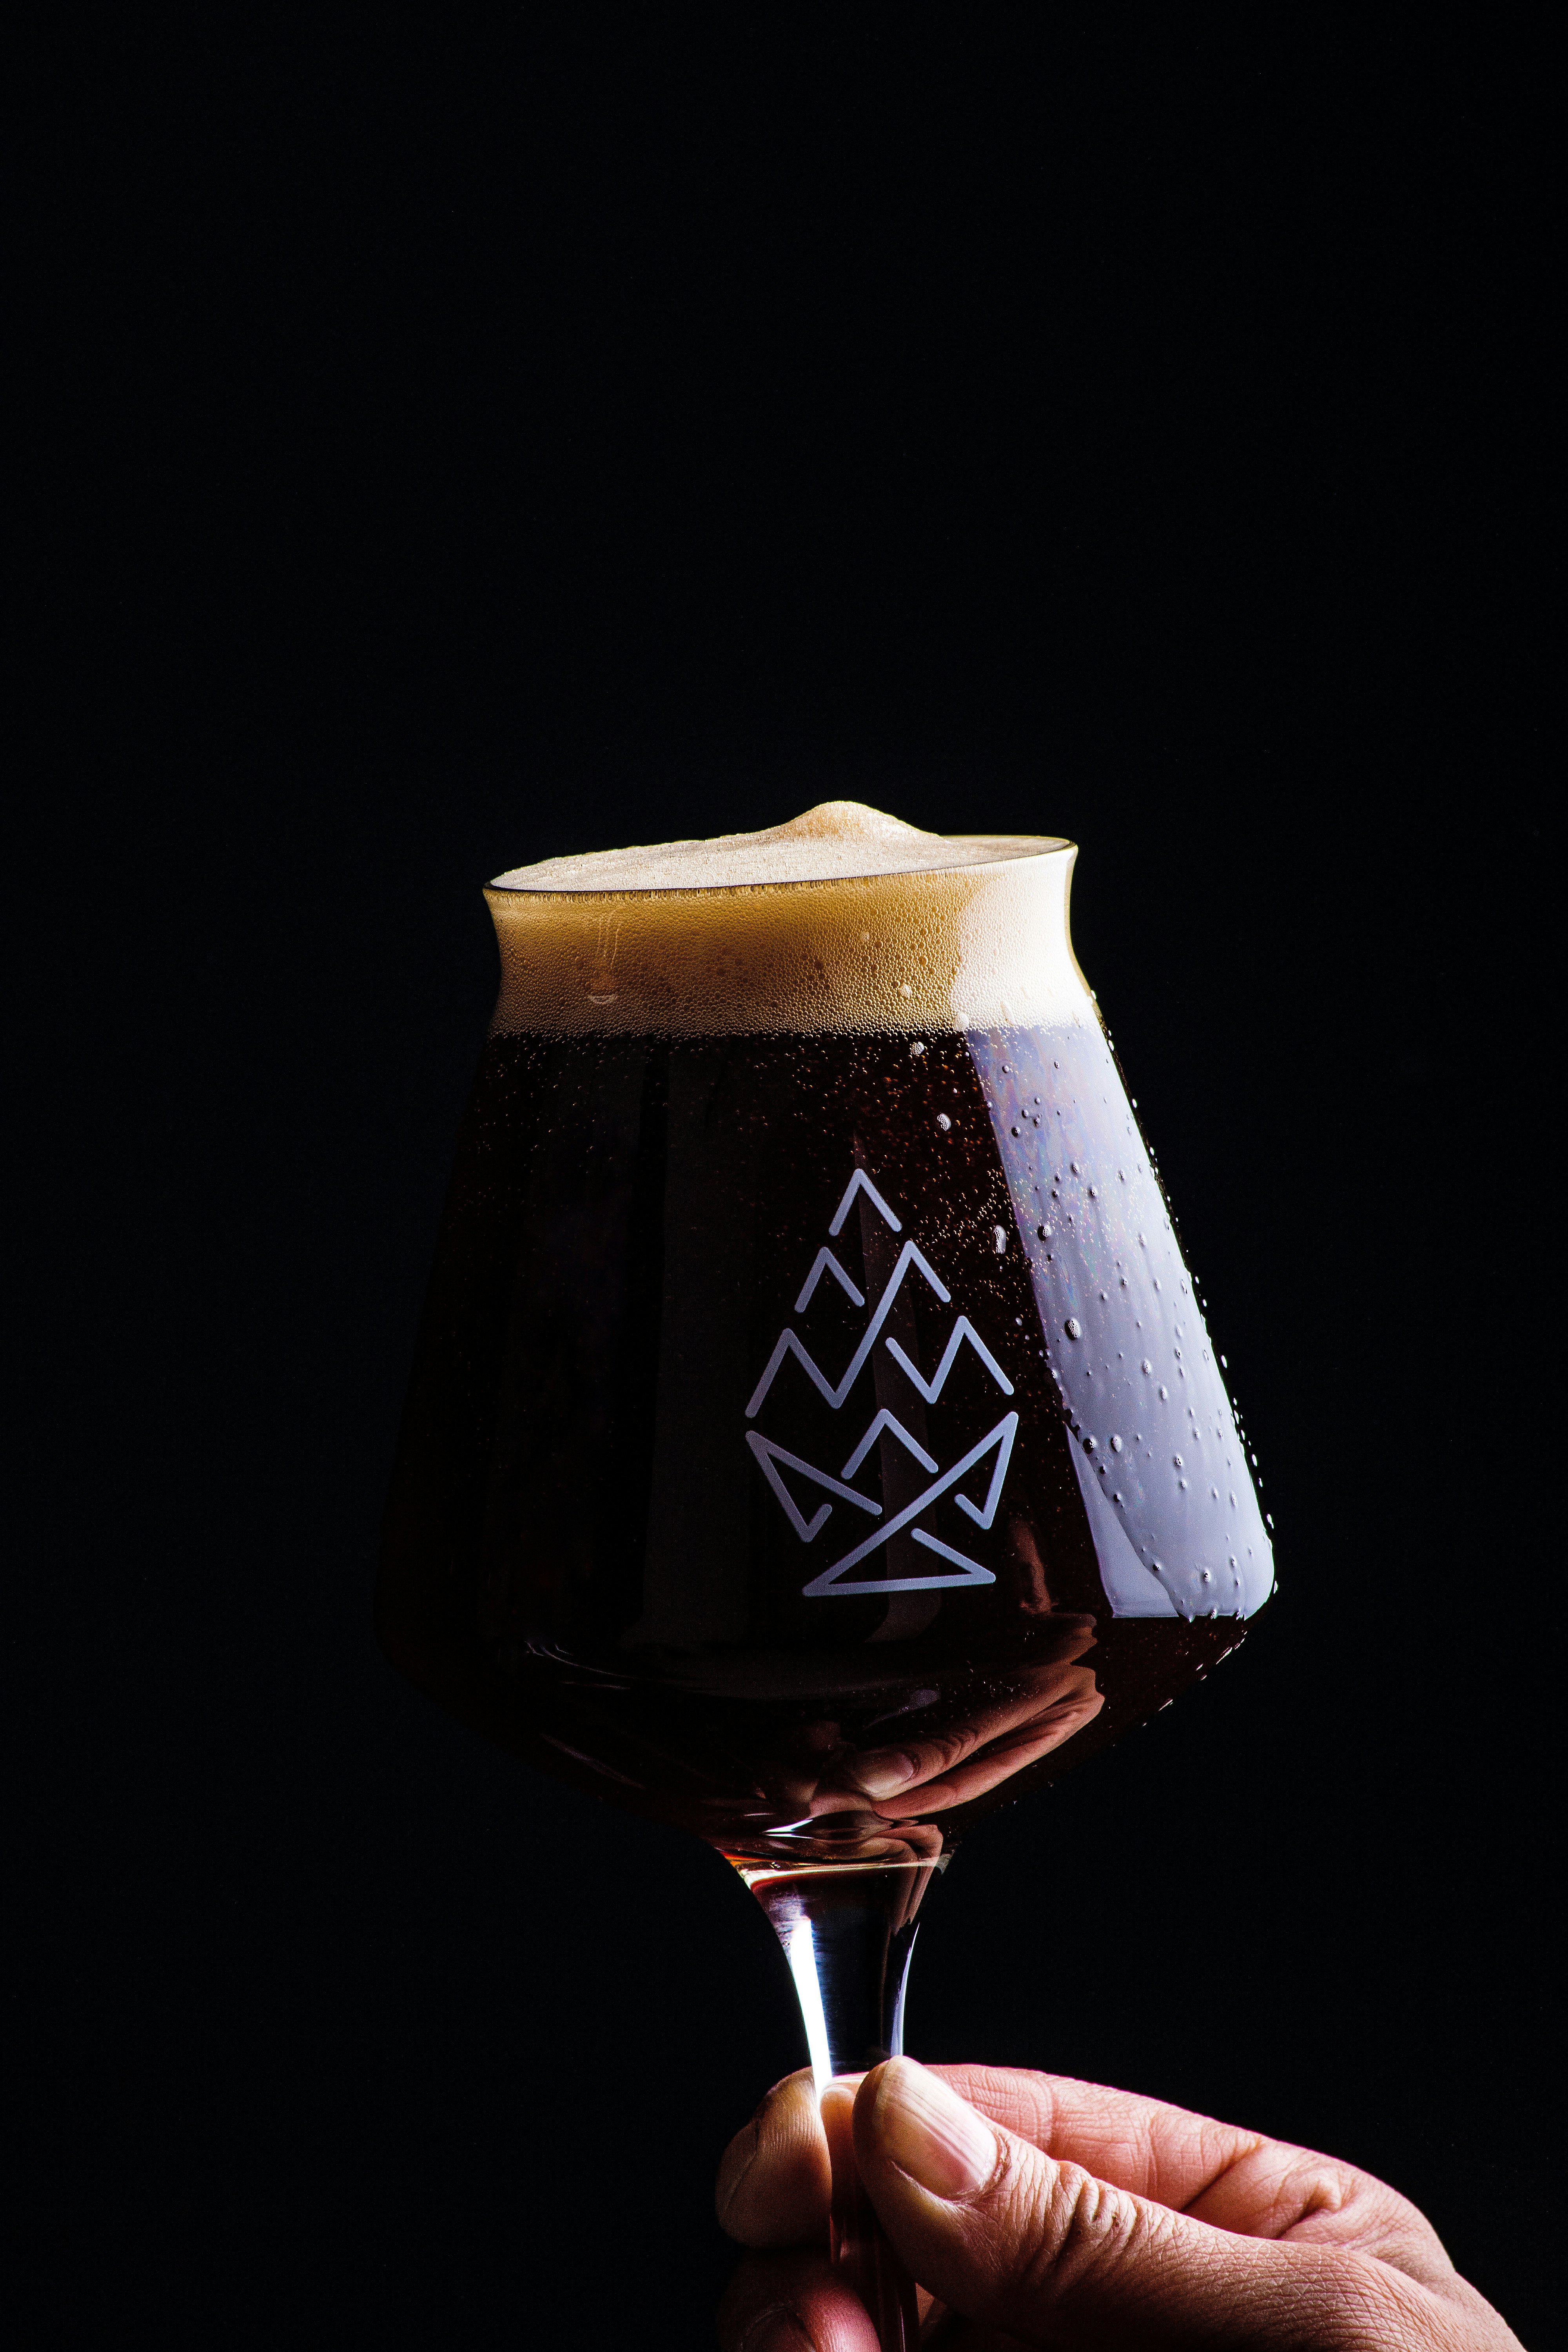 A hand holding a glass of dark beer